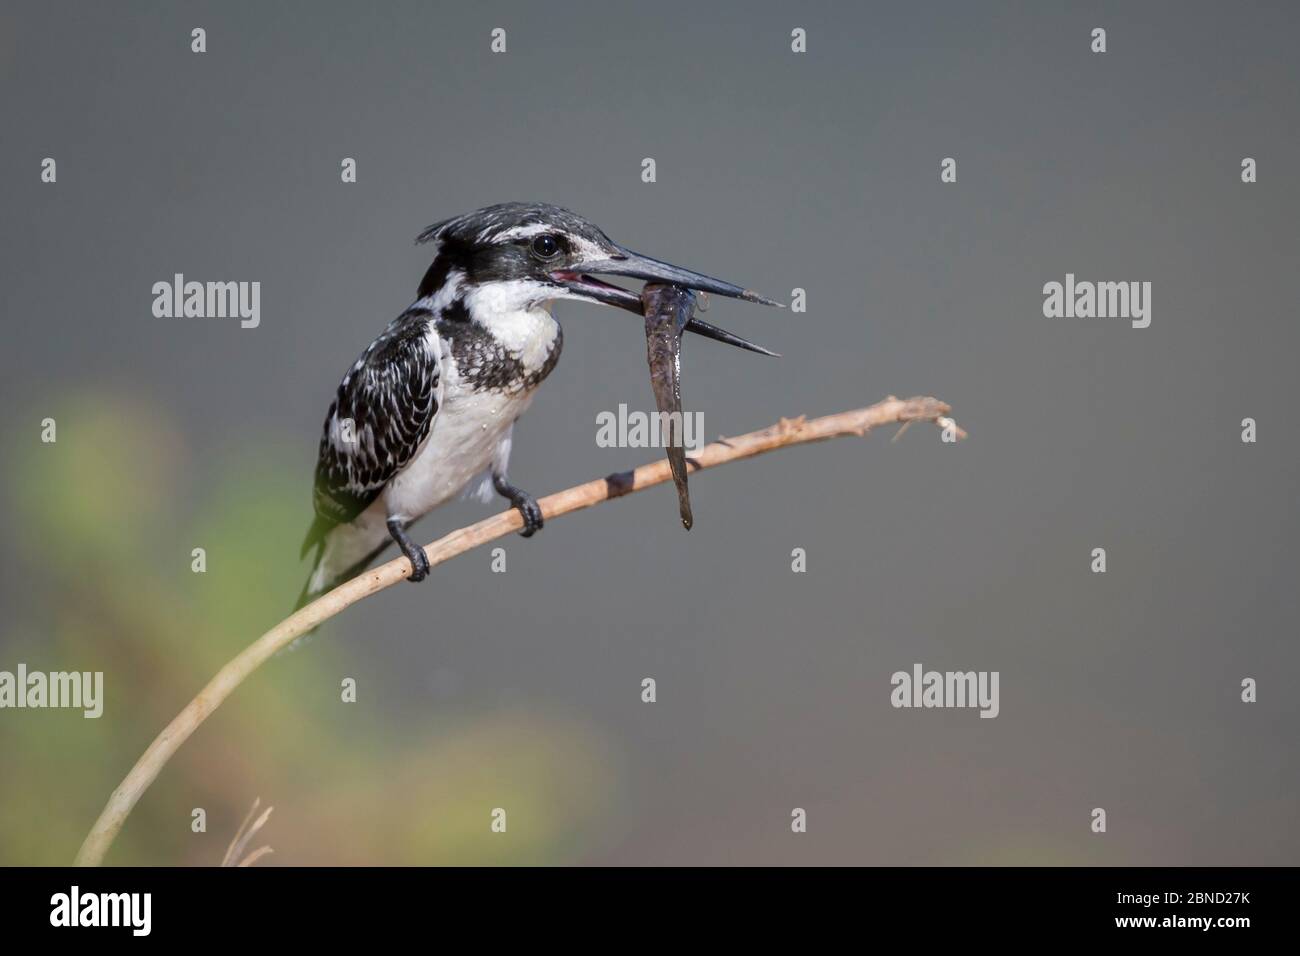 Pied kingfisher (Ceryle rudis) perched on a dead branch with fish after successful dive at a waterhole, Venetia Limpopo Nature Reserve, Limopopo Provi Stock Photo